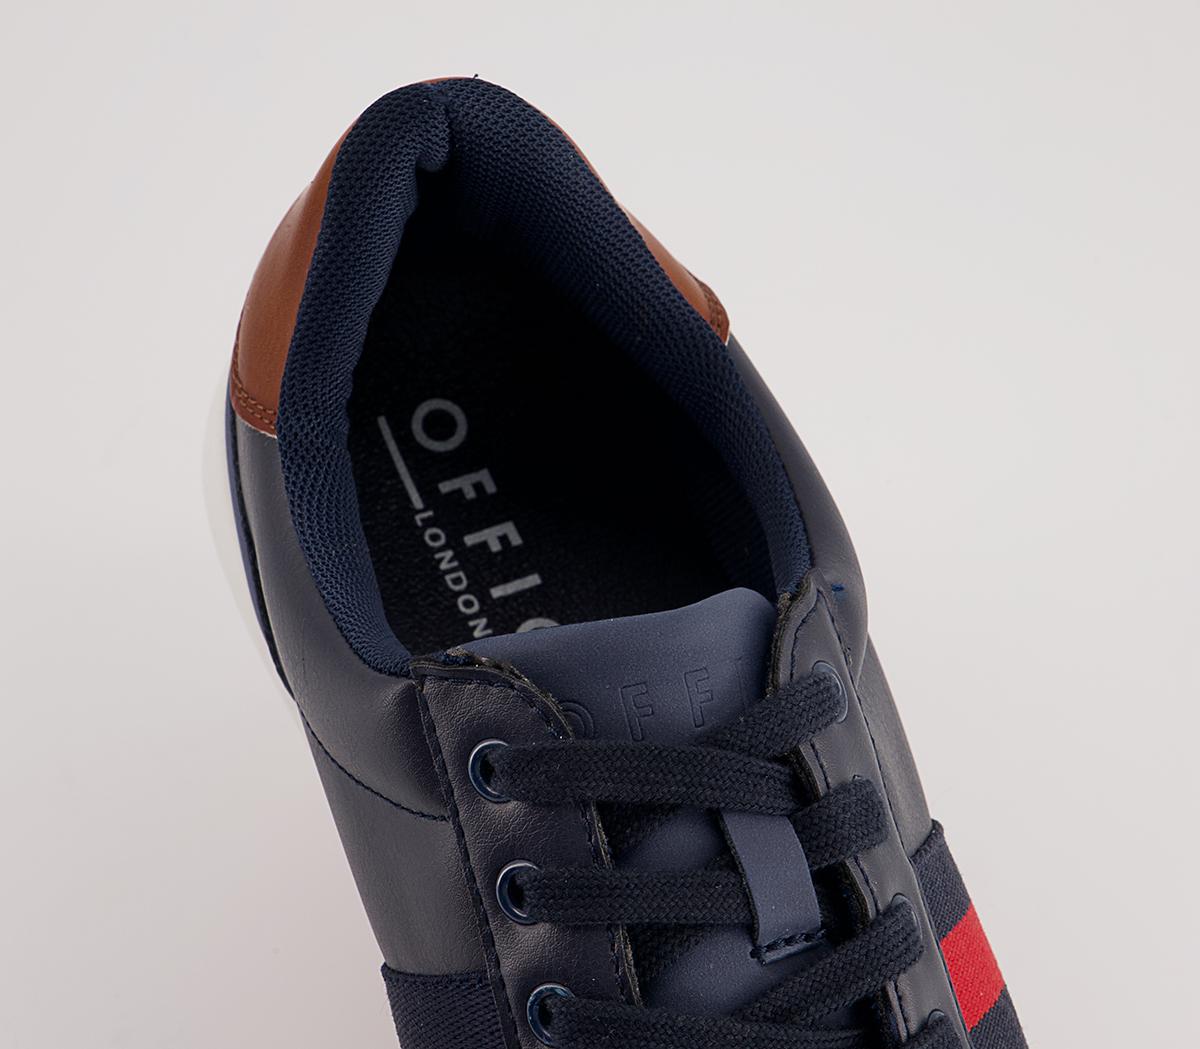 OFFICE Colne Side Ribbon Casual Sneakers Navy - Men's Casual Shoes